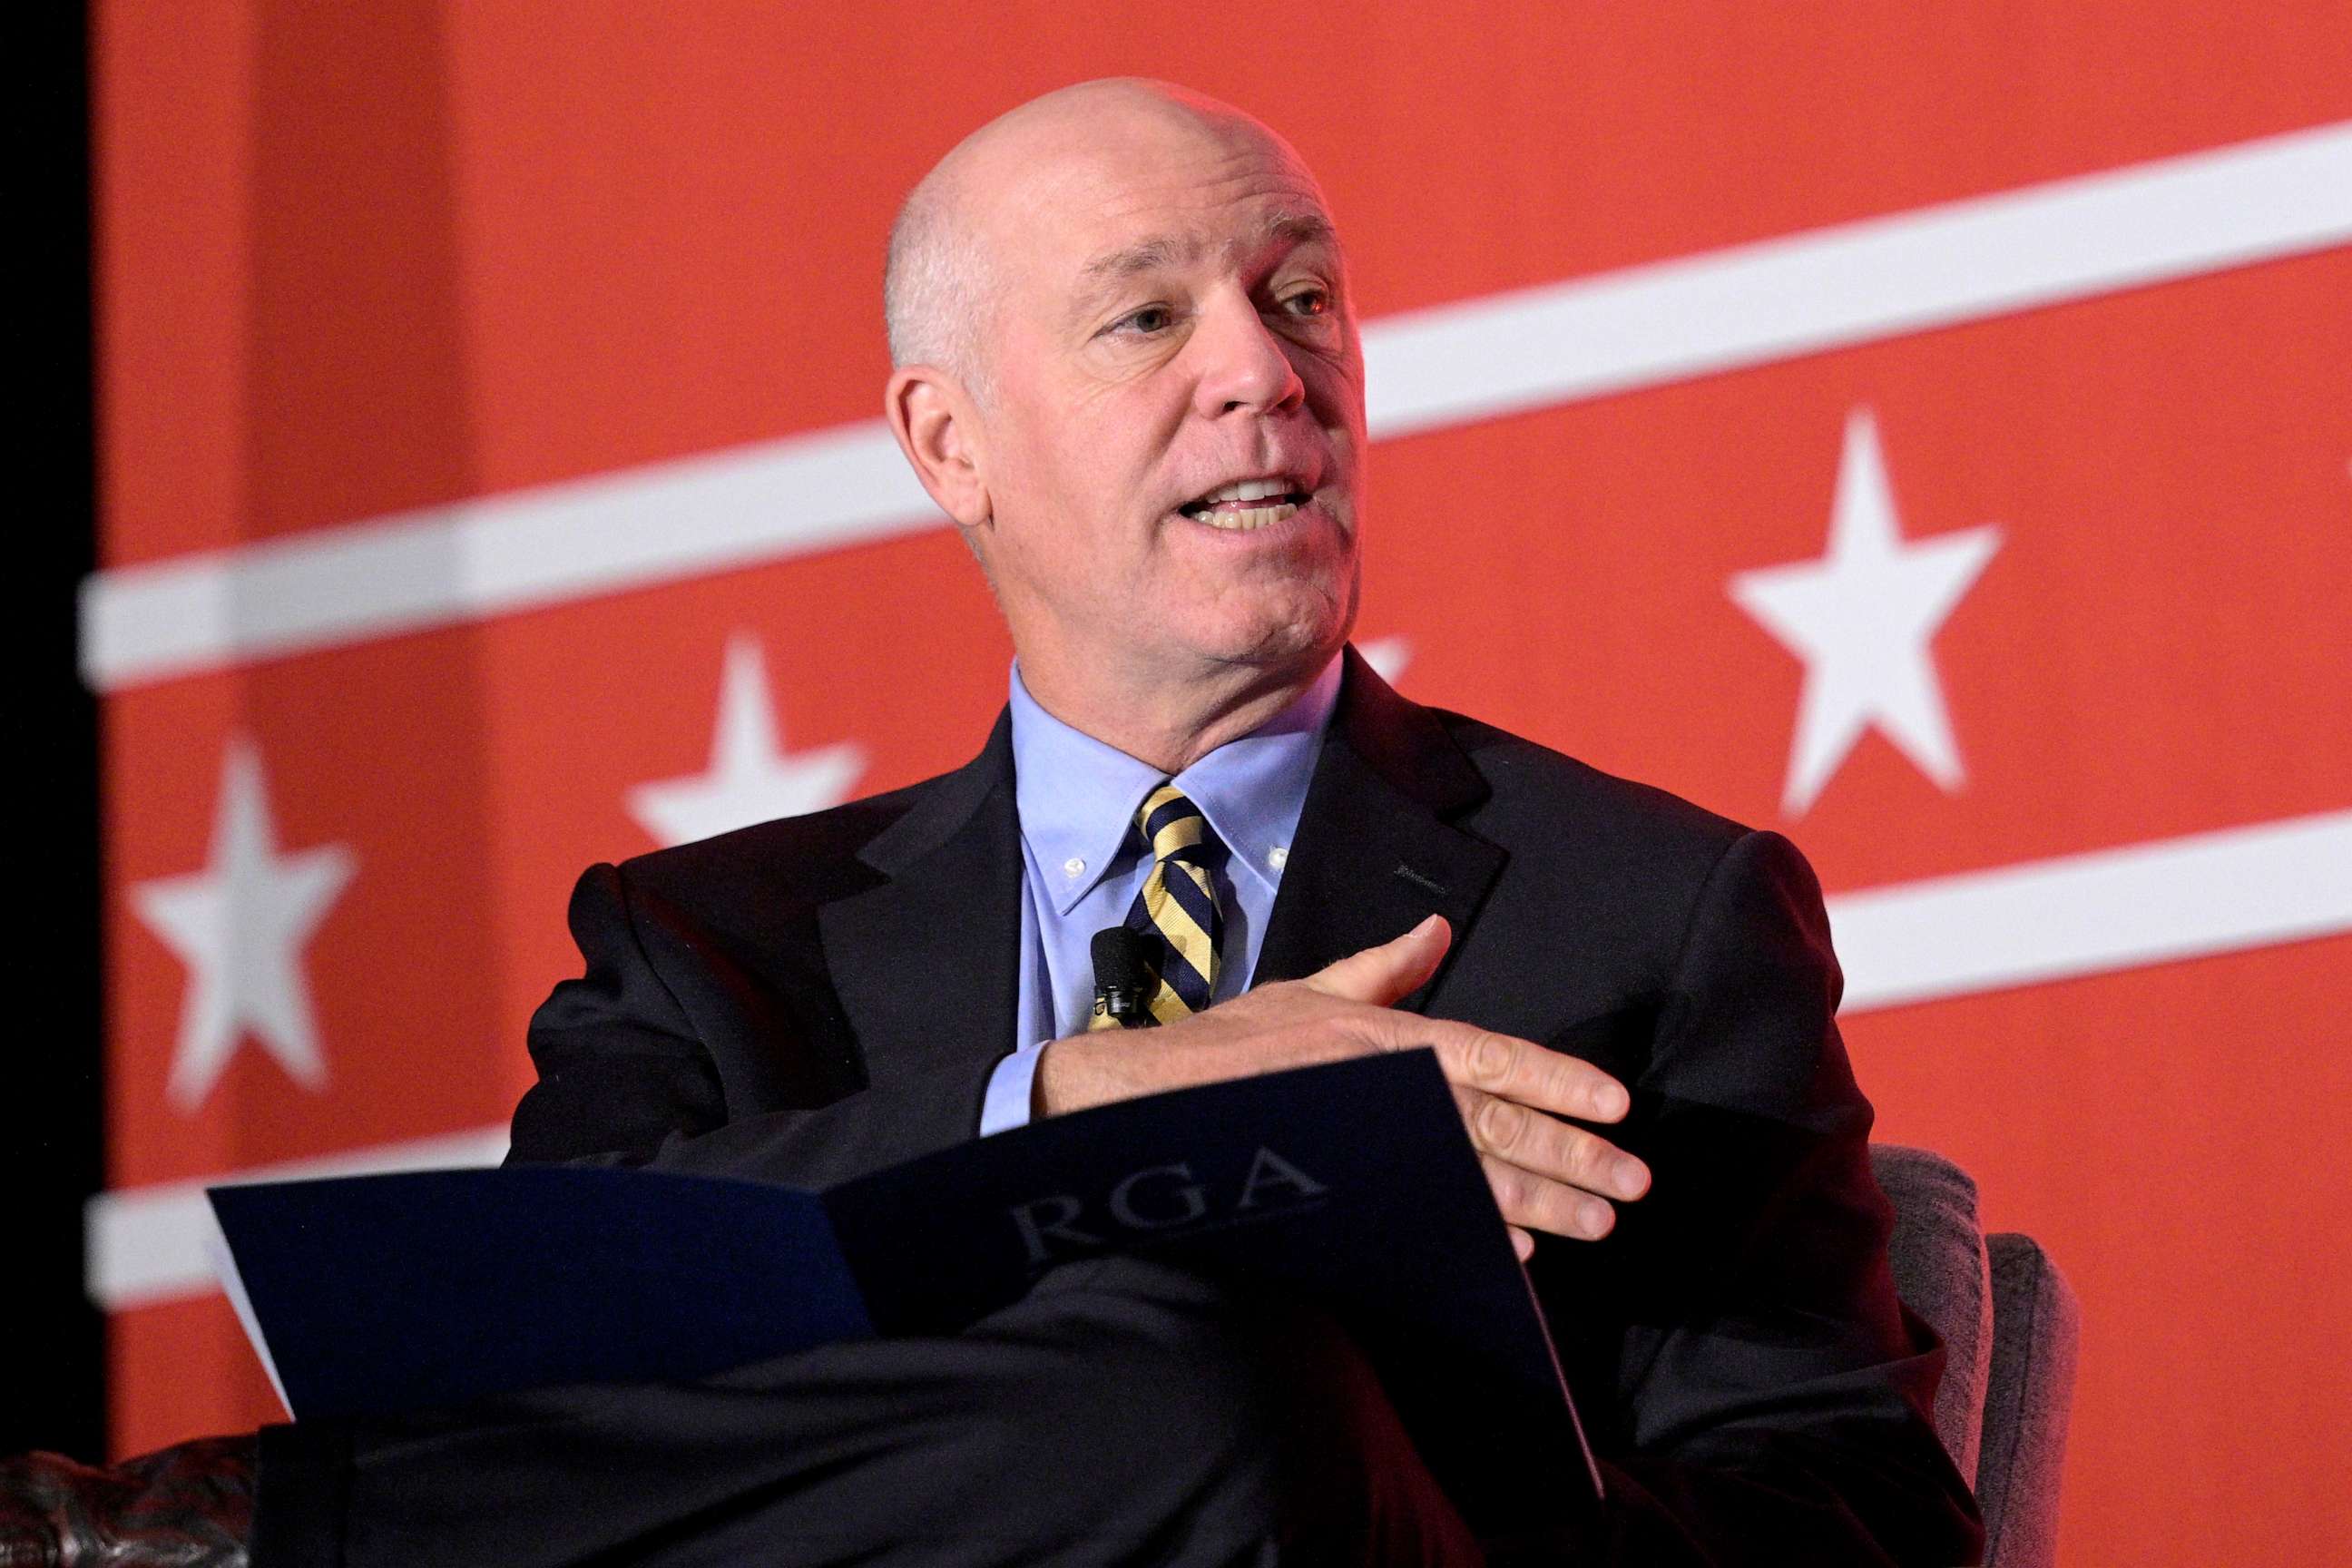 PHOTO: Montana Gov. Greg Gianforte poses a question while taking part in a panel discussion during a Republican Governors Association conference, Nov. 16, 2022, in Orlando, Fla.